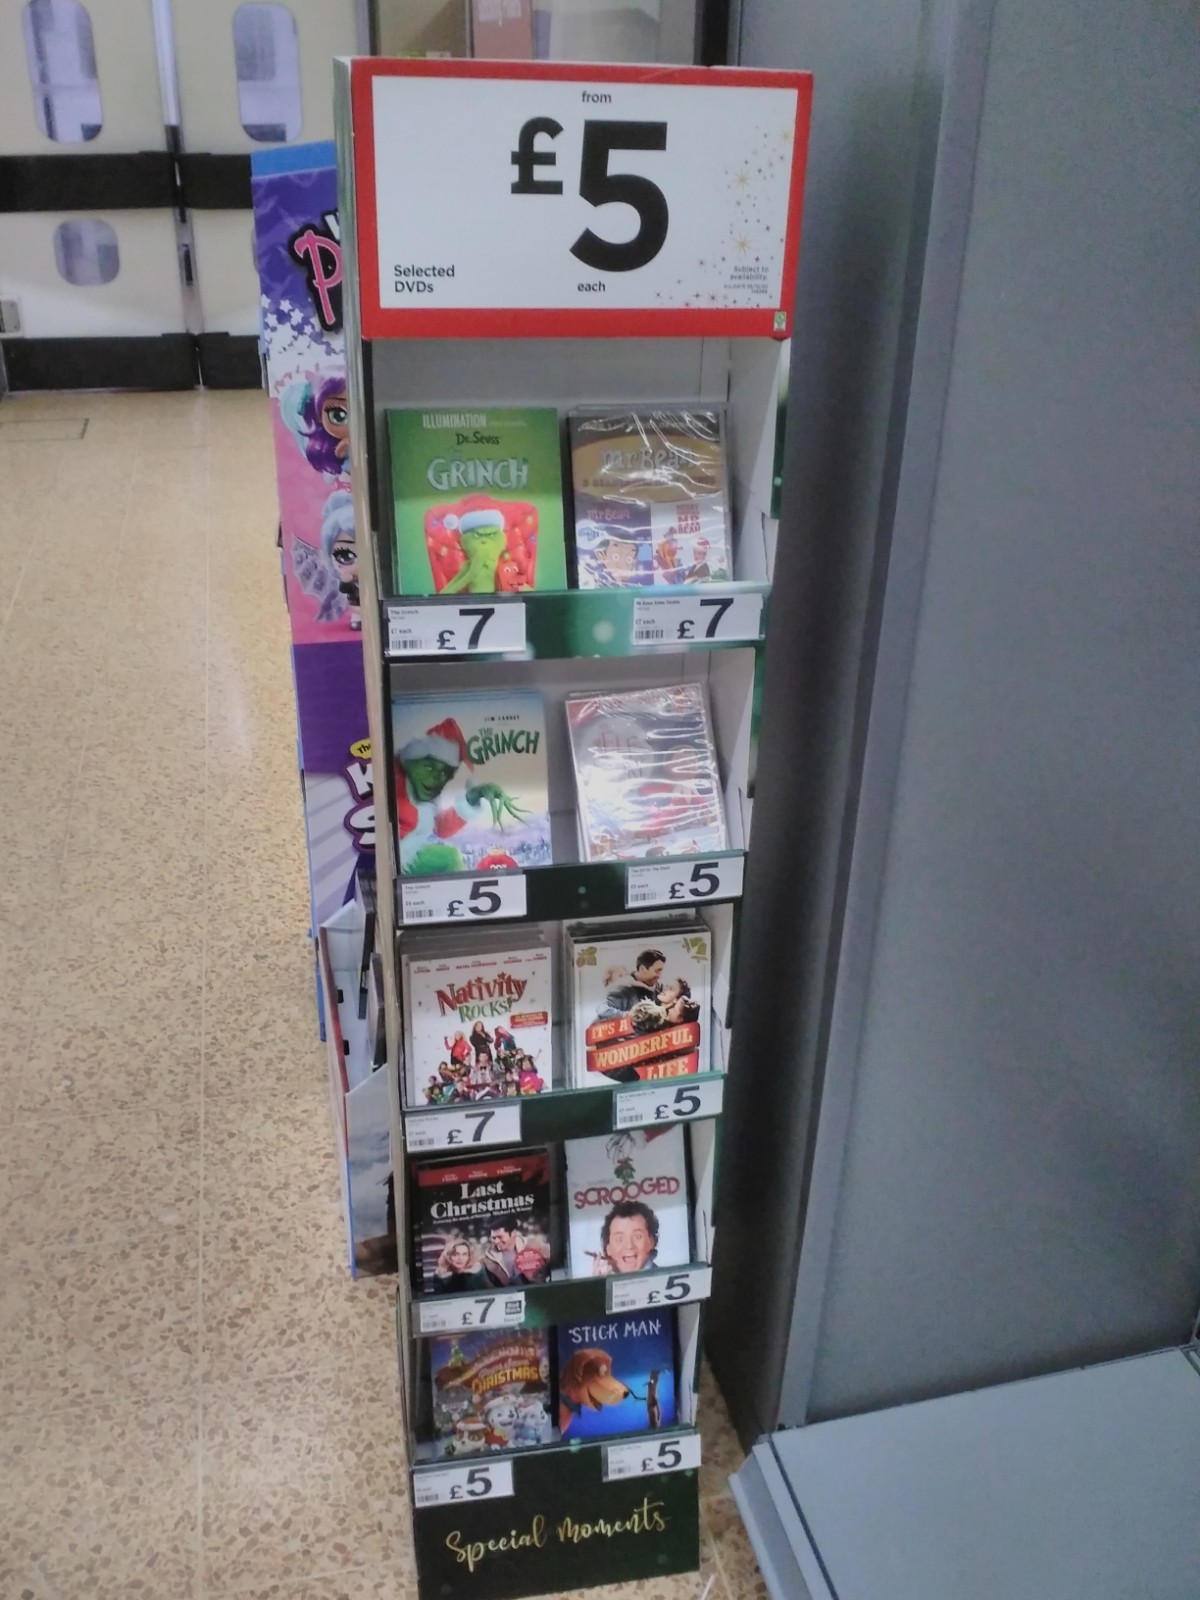 Katastrofe fjende støvle eXPD8 FieldMarketing on Twitter: "We're in #Asda stores this week setting  up a #Gifting Tower on behalf of Universal Pictures 🌍 With DVDs that would  make great #Christmas #gifts such as #DowntonAbbey